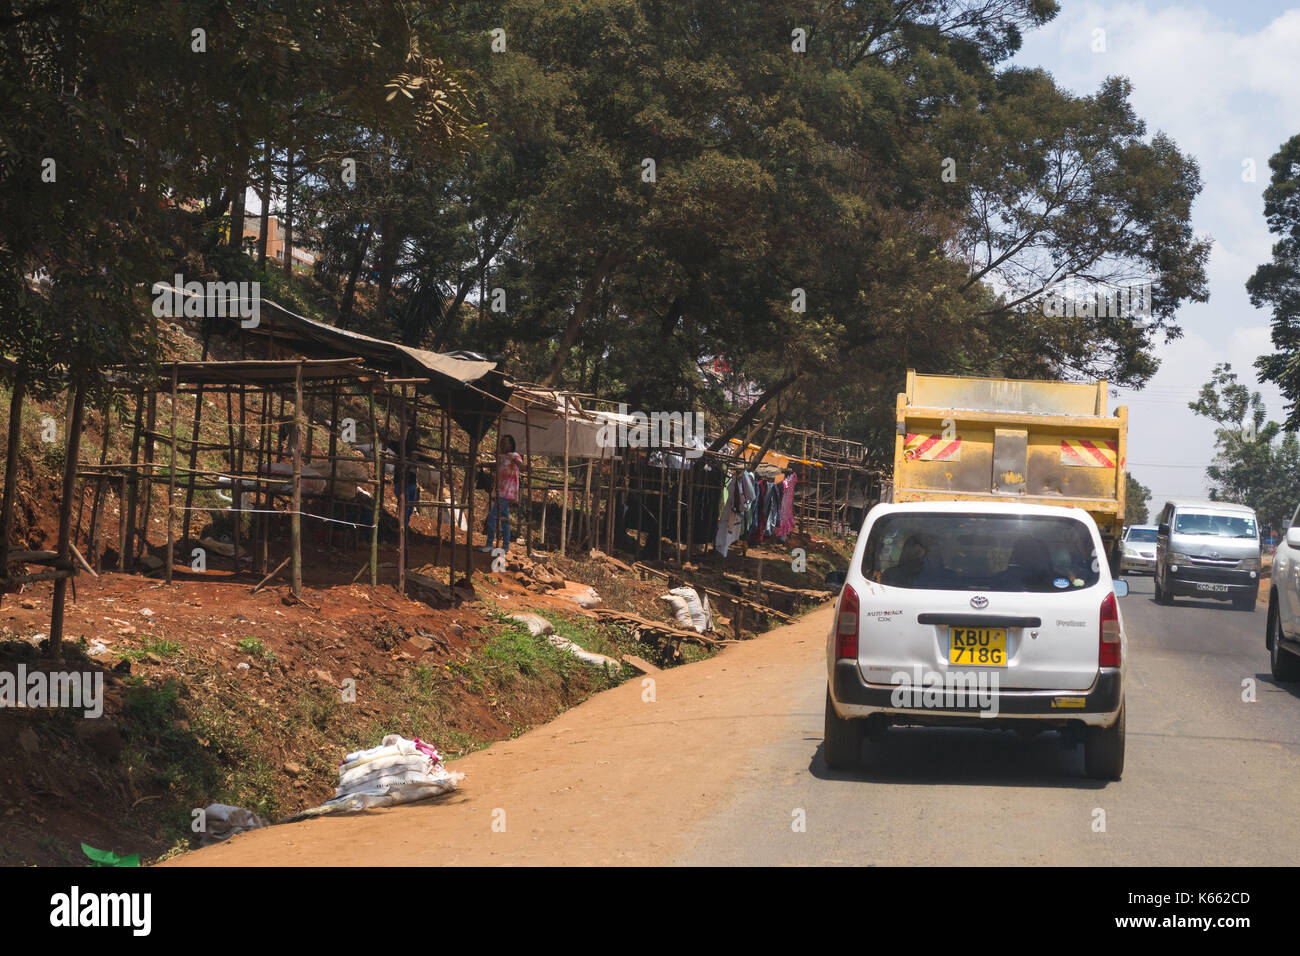 Wooden market stalls by roadside as vehicles drive past, Kenya Stock Photo